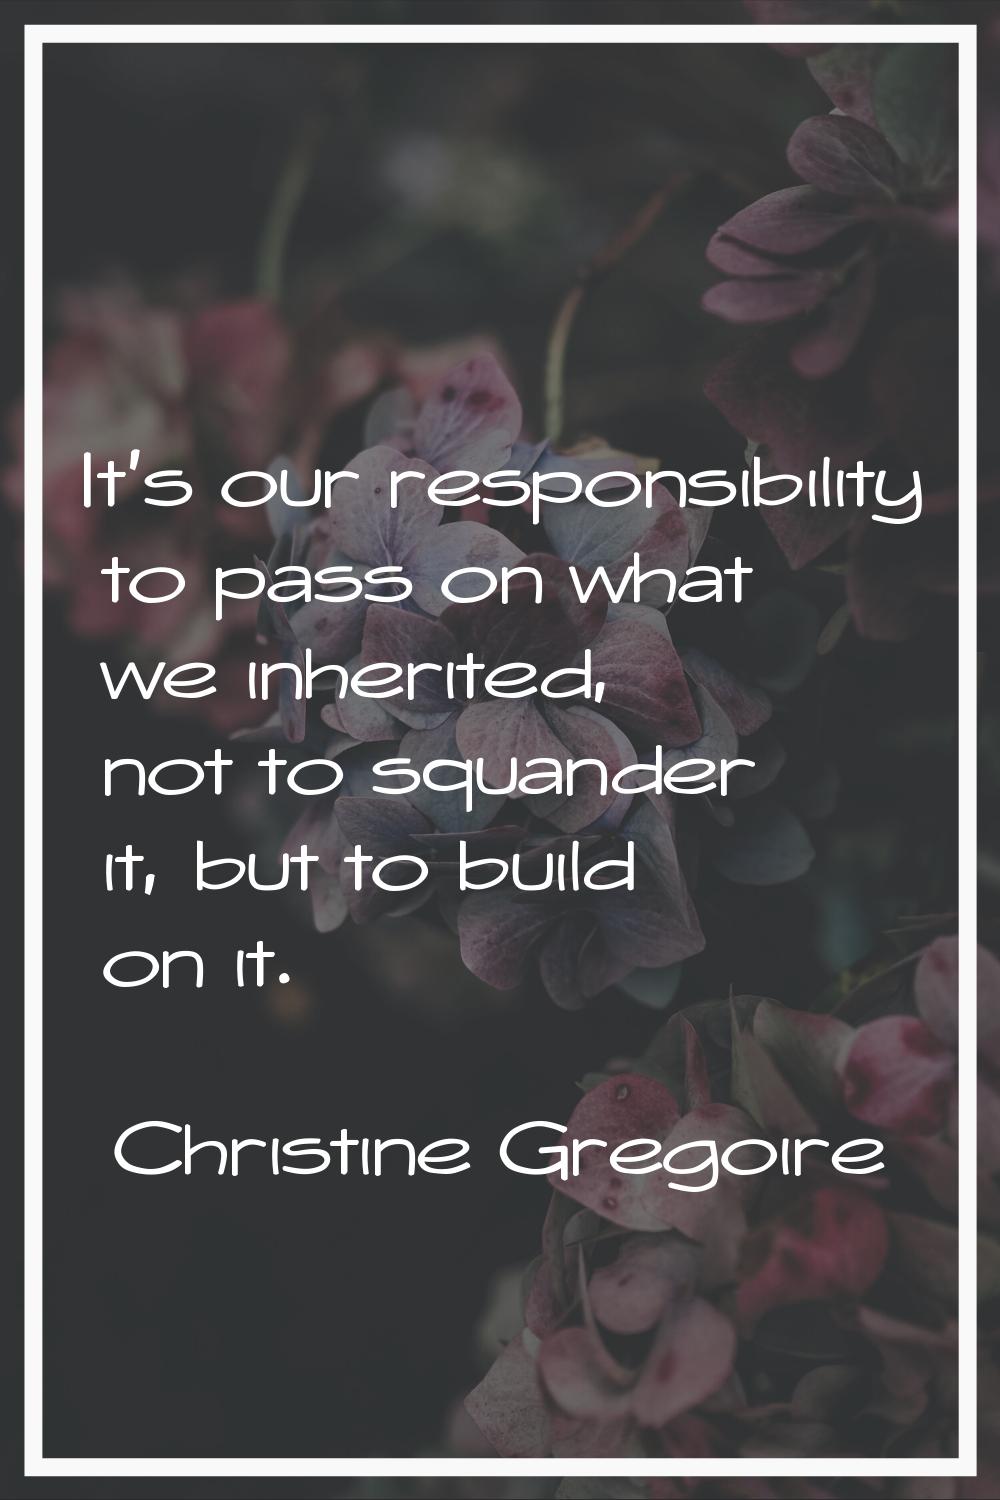 It's our responsibility to pass on what we inherited, not to squander it, but to build on it.